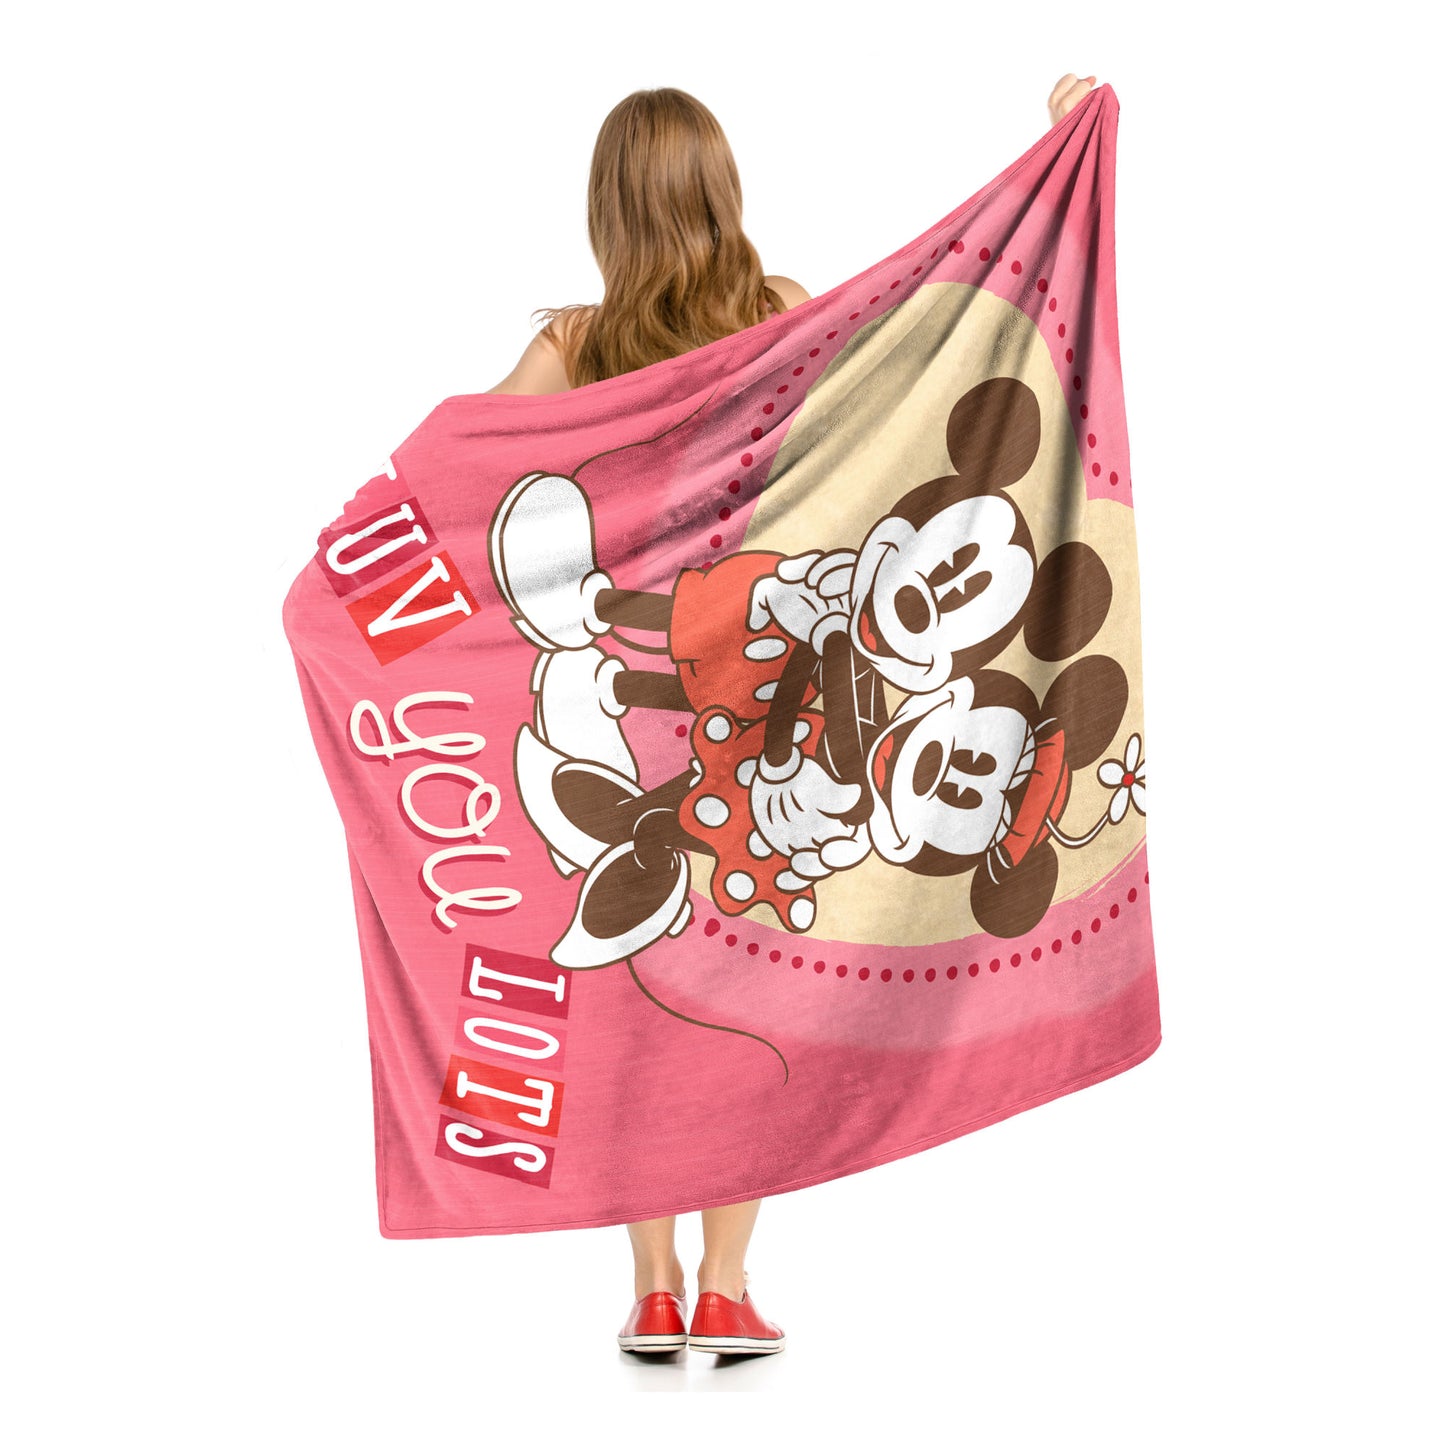 Mickey Mouse, Love You Lots Throw Blanket 50"x60"